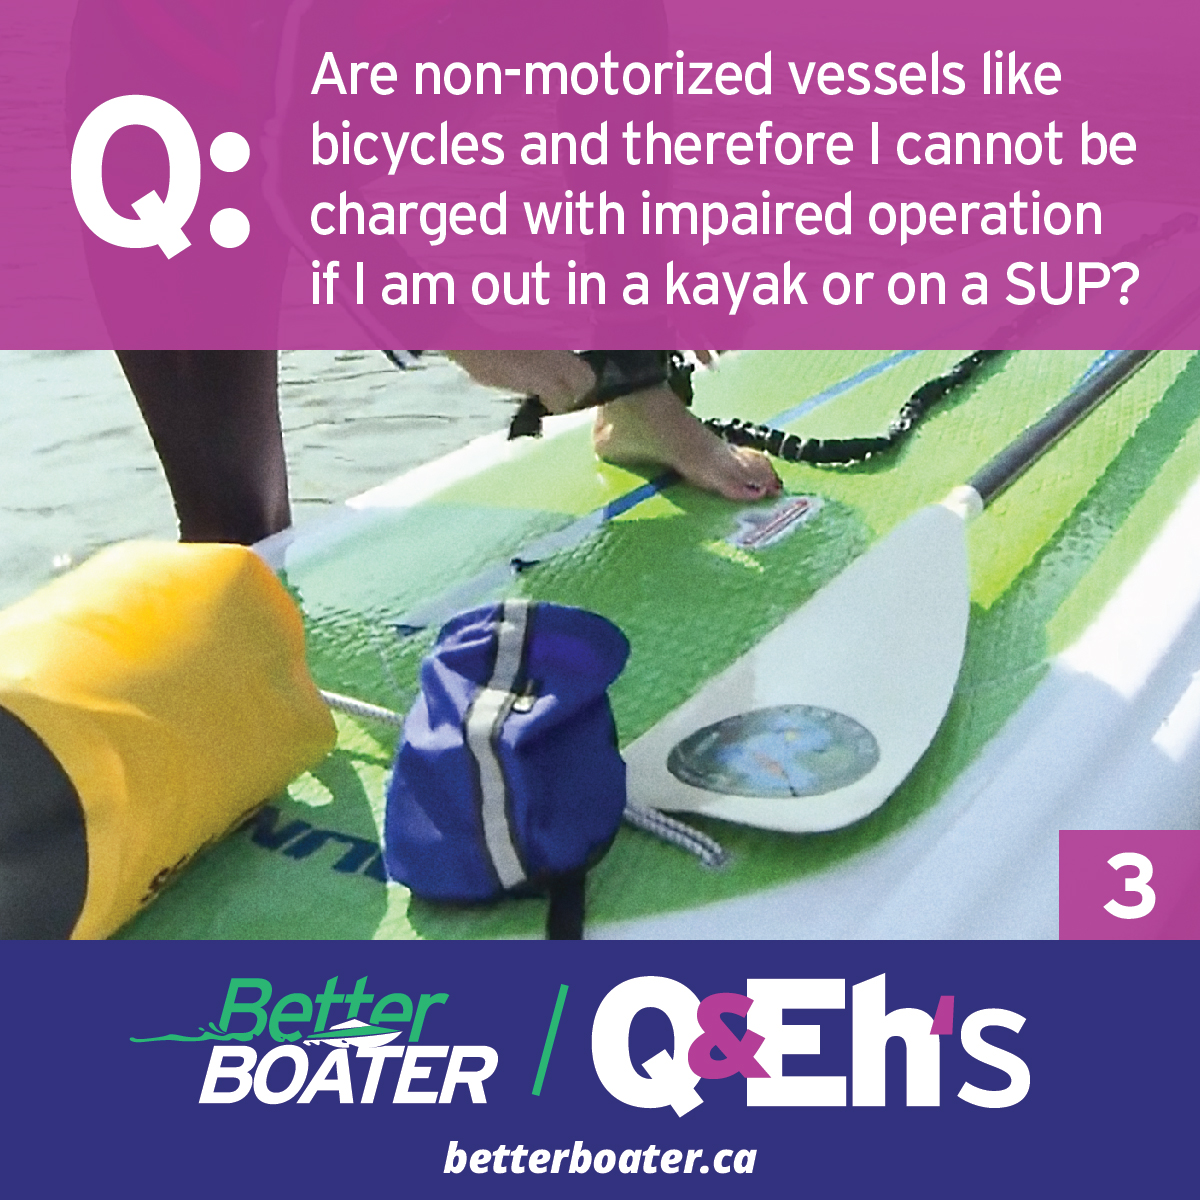 https://betterboater.ca/Q&Eh:%20SUP%20Impared